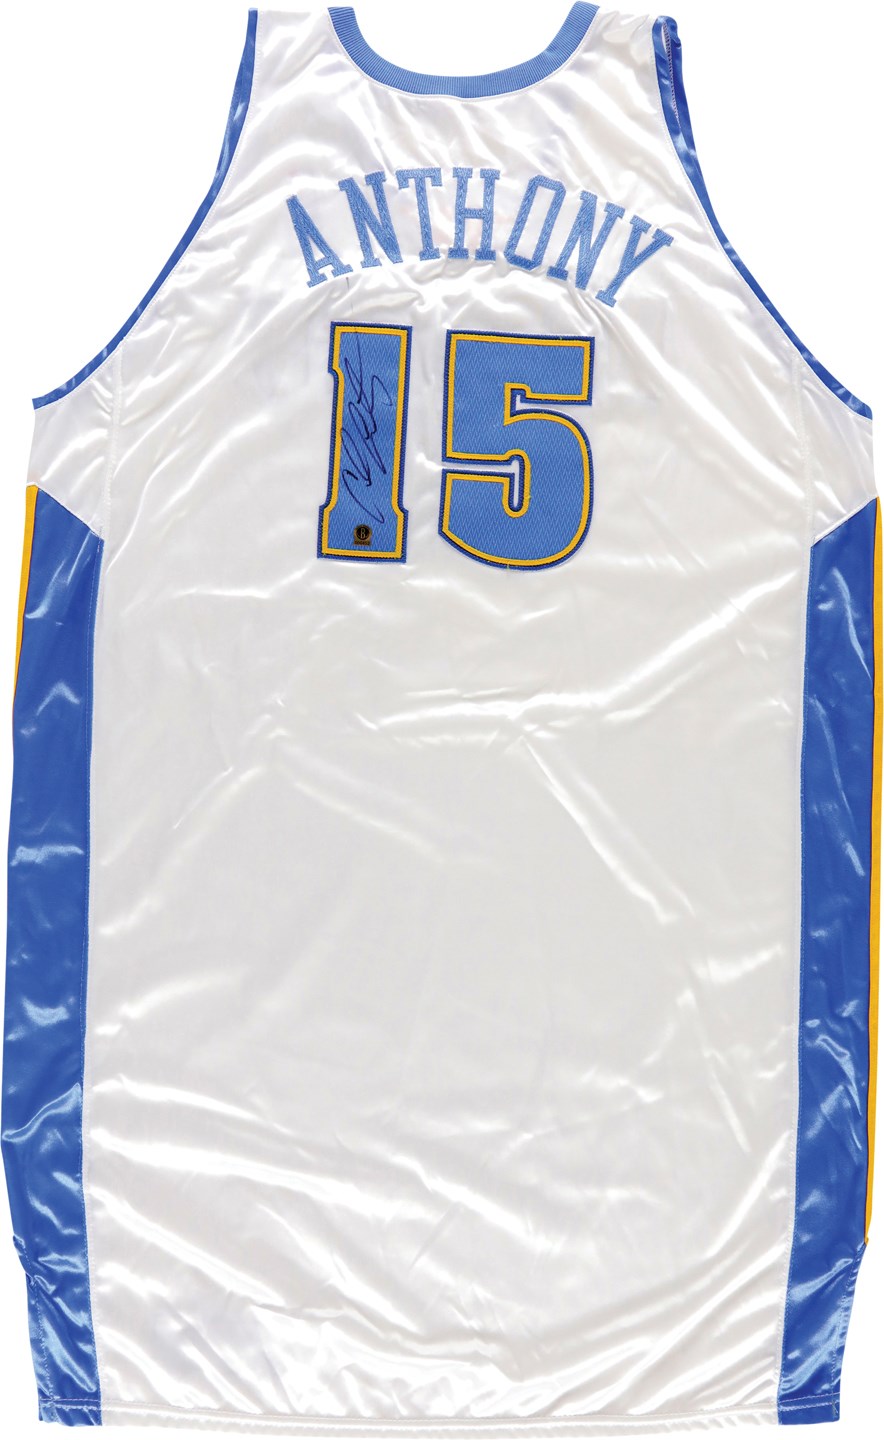 - 12/26/03 Carmelo Anthony Rookie Denver Nuggets Signed Game Worn Jersey - 37 Point and Season-High Three Pointer Game (Melo Beckett COA)